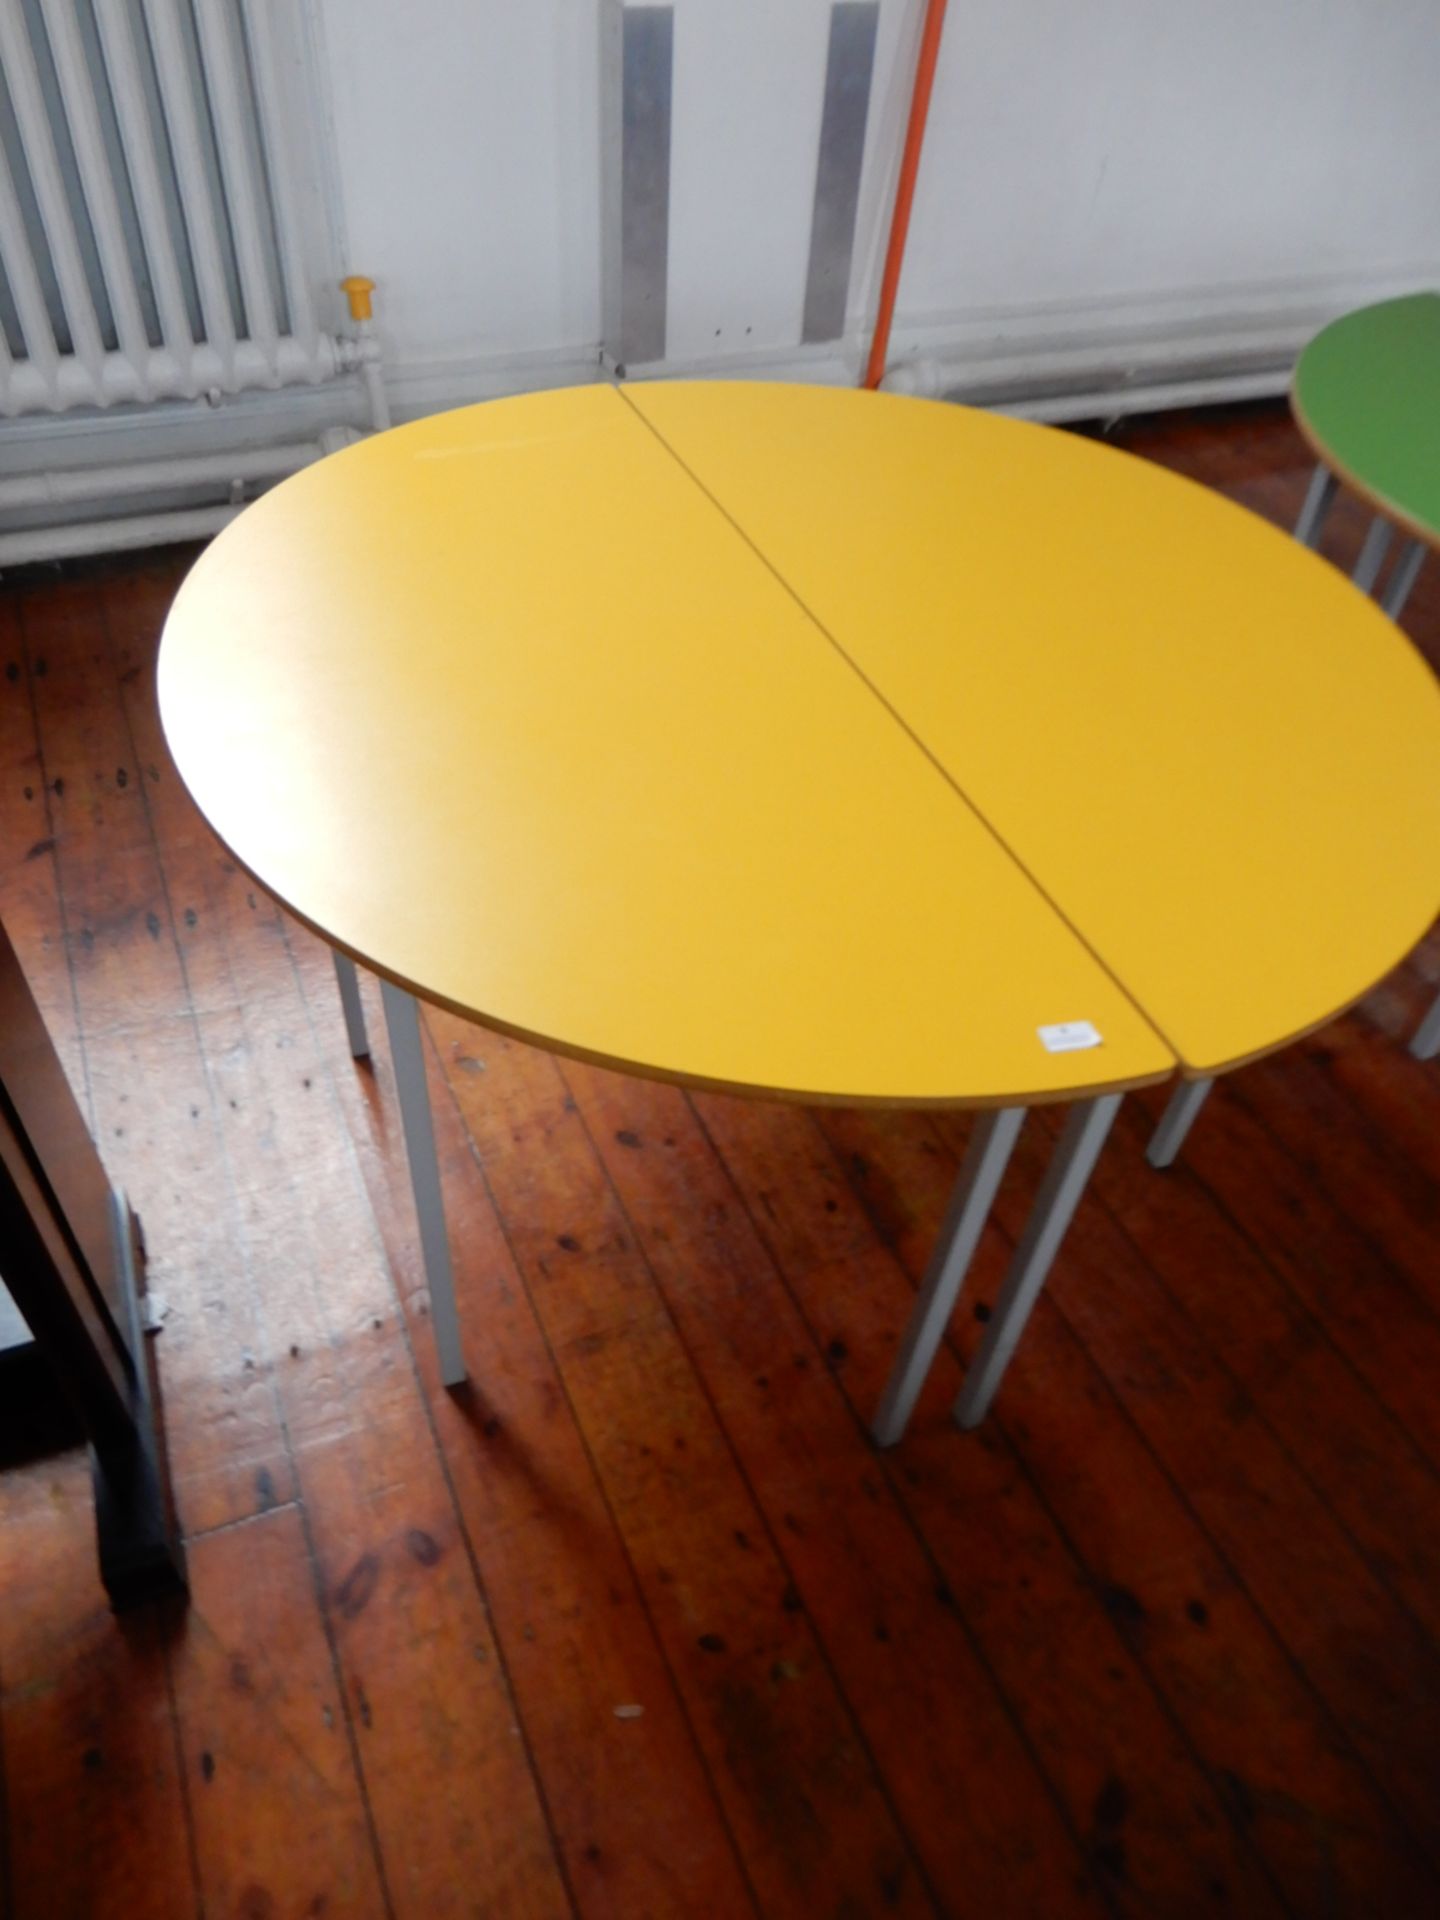 *2 Semicircular Tables with Yellow Tops on Grey Fr - Image 2 of 2